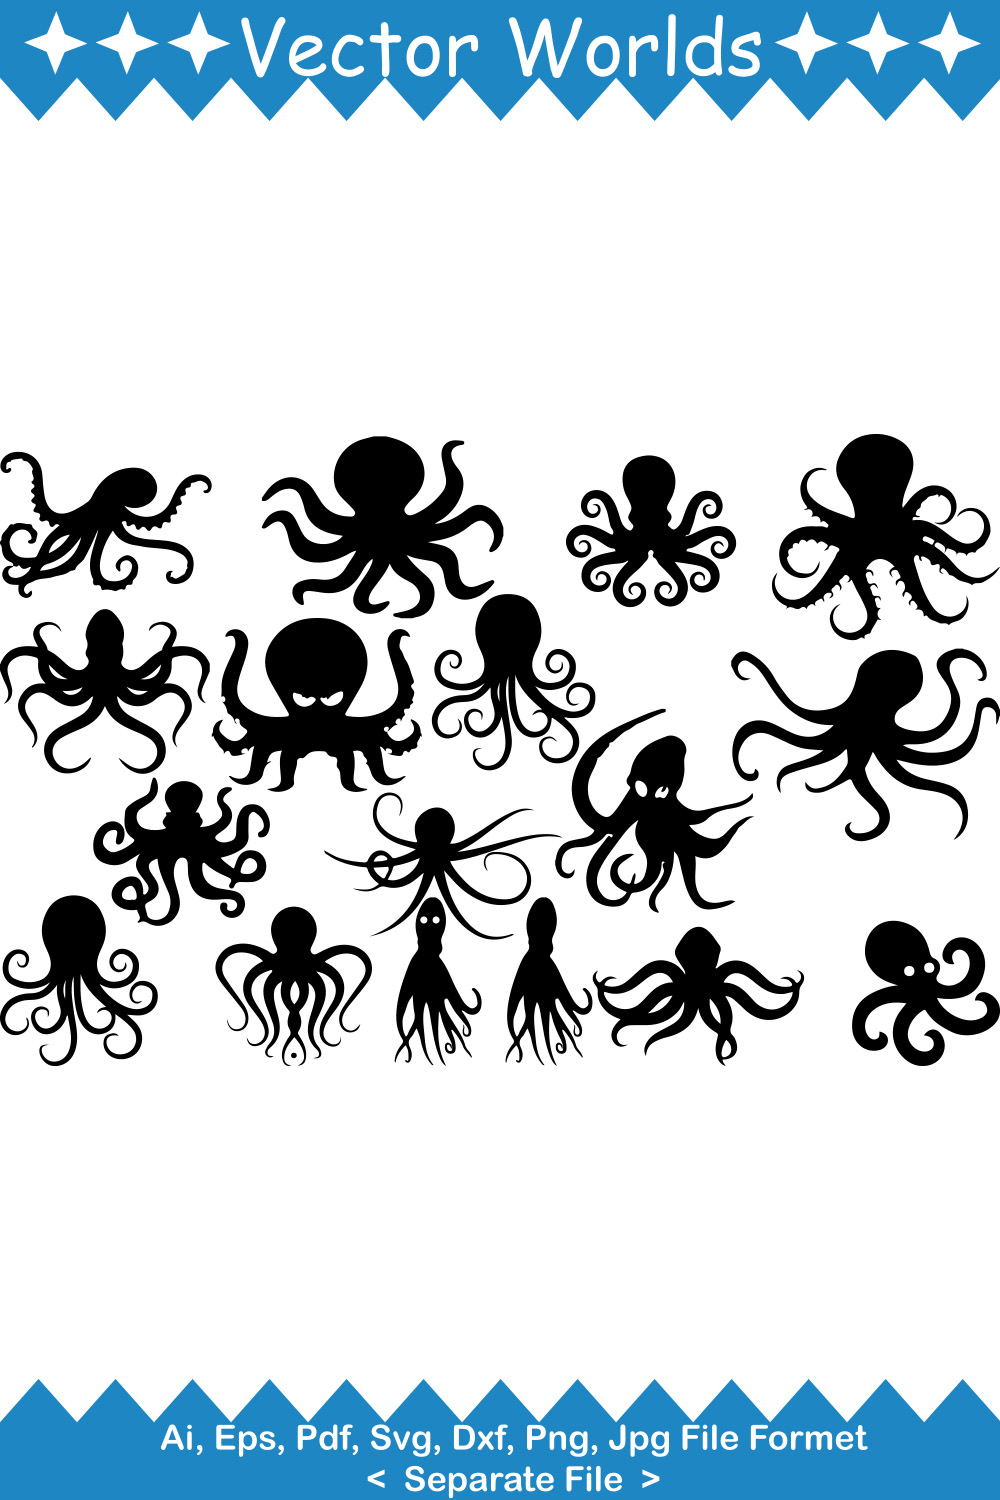 Group of octopus silhouettes on a white background.